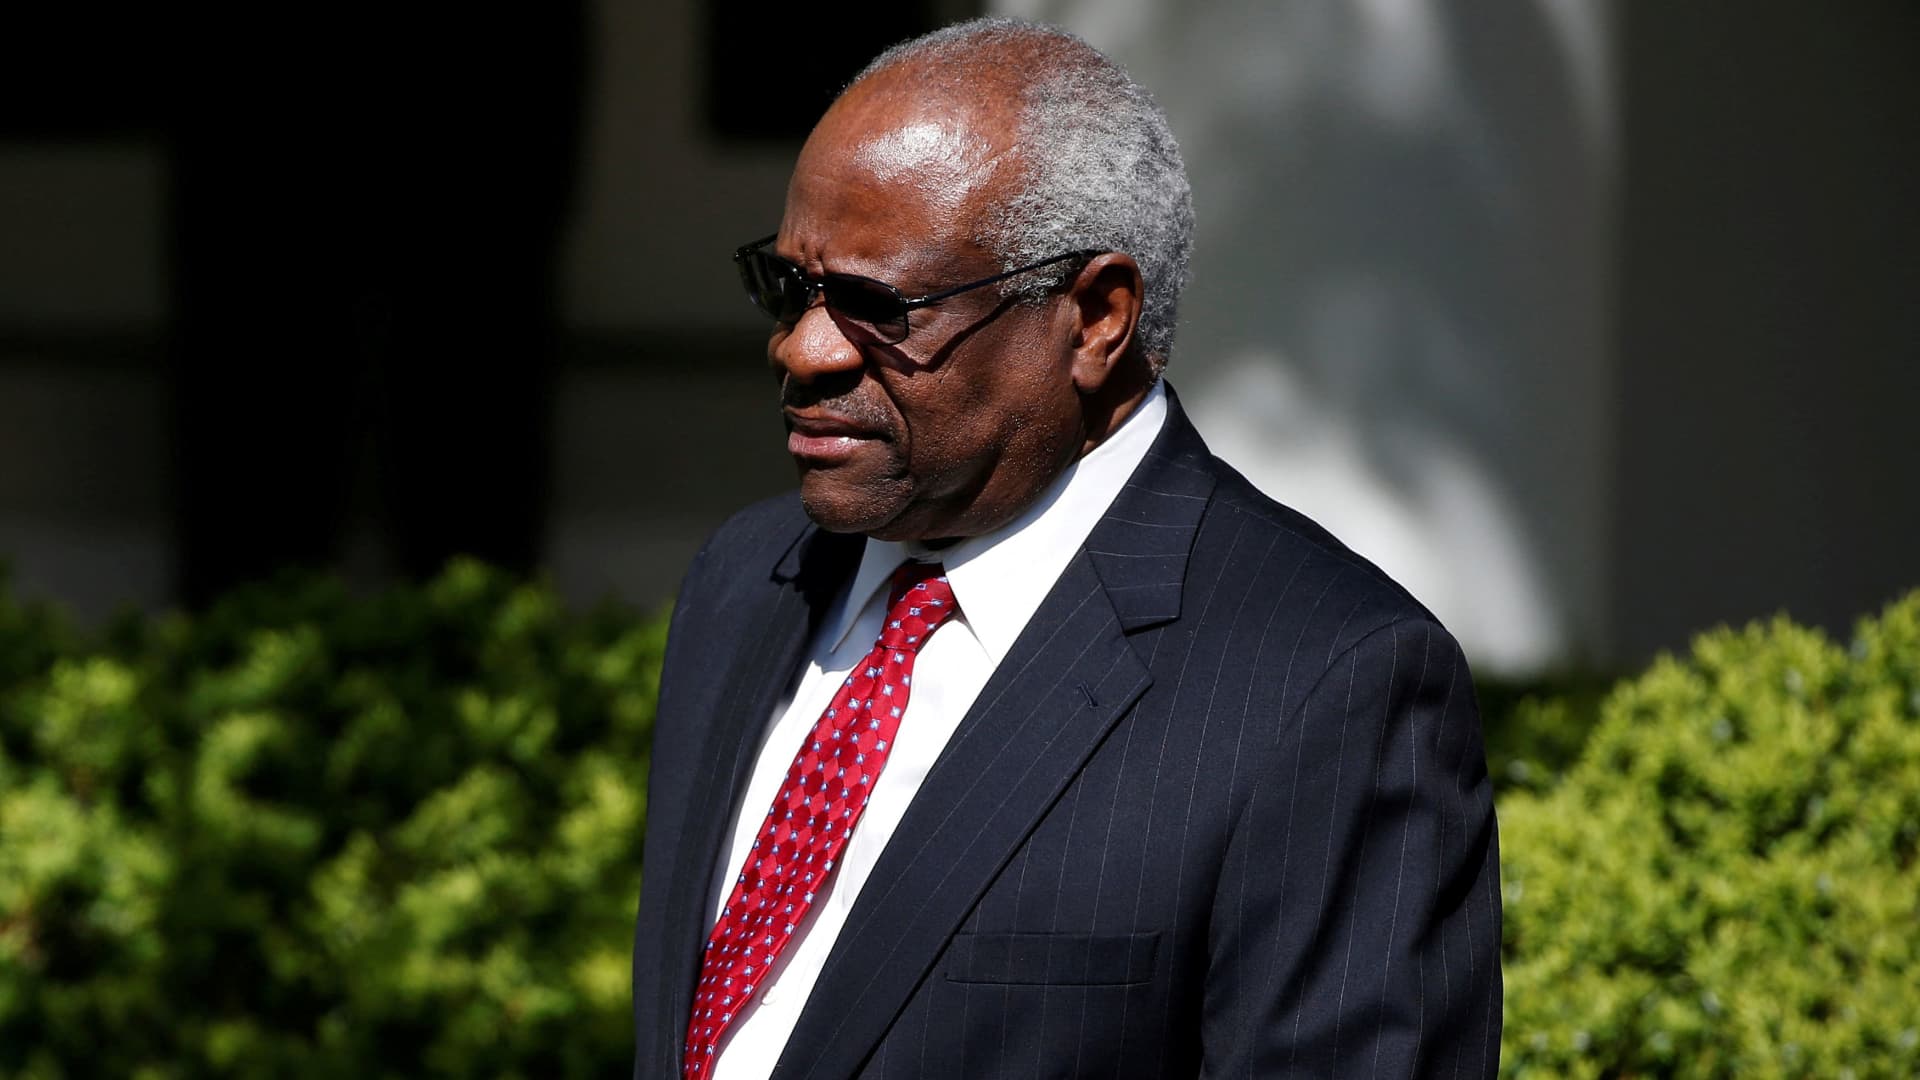 Associate Supreme Court Justice Clarence Thomas arrives for the swearing-in ceremony of Judge Neil Gorsuch as an associate Supreme Court justice in the Rose Garden of the White House in Washington, April 10, 2017.